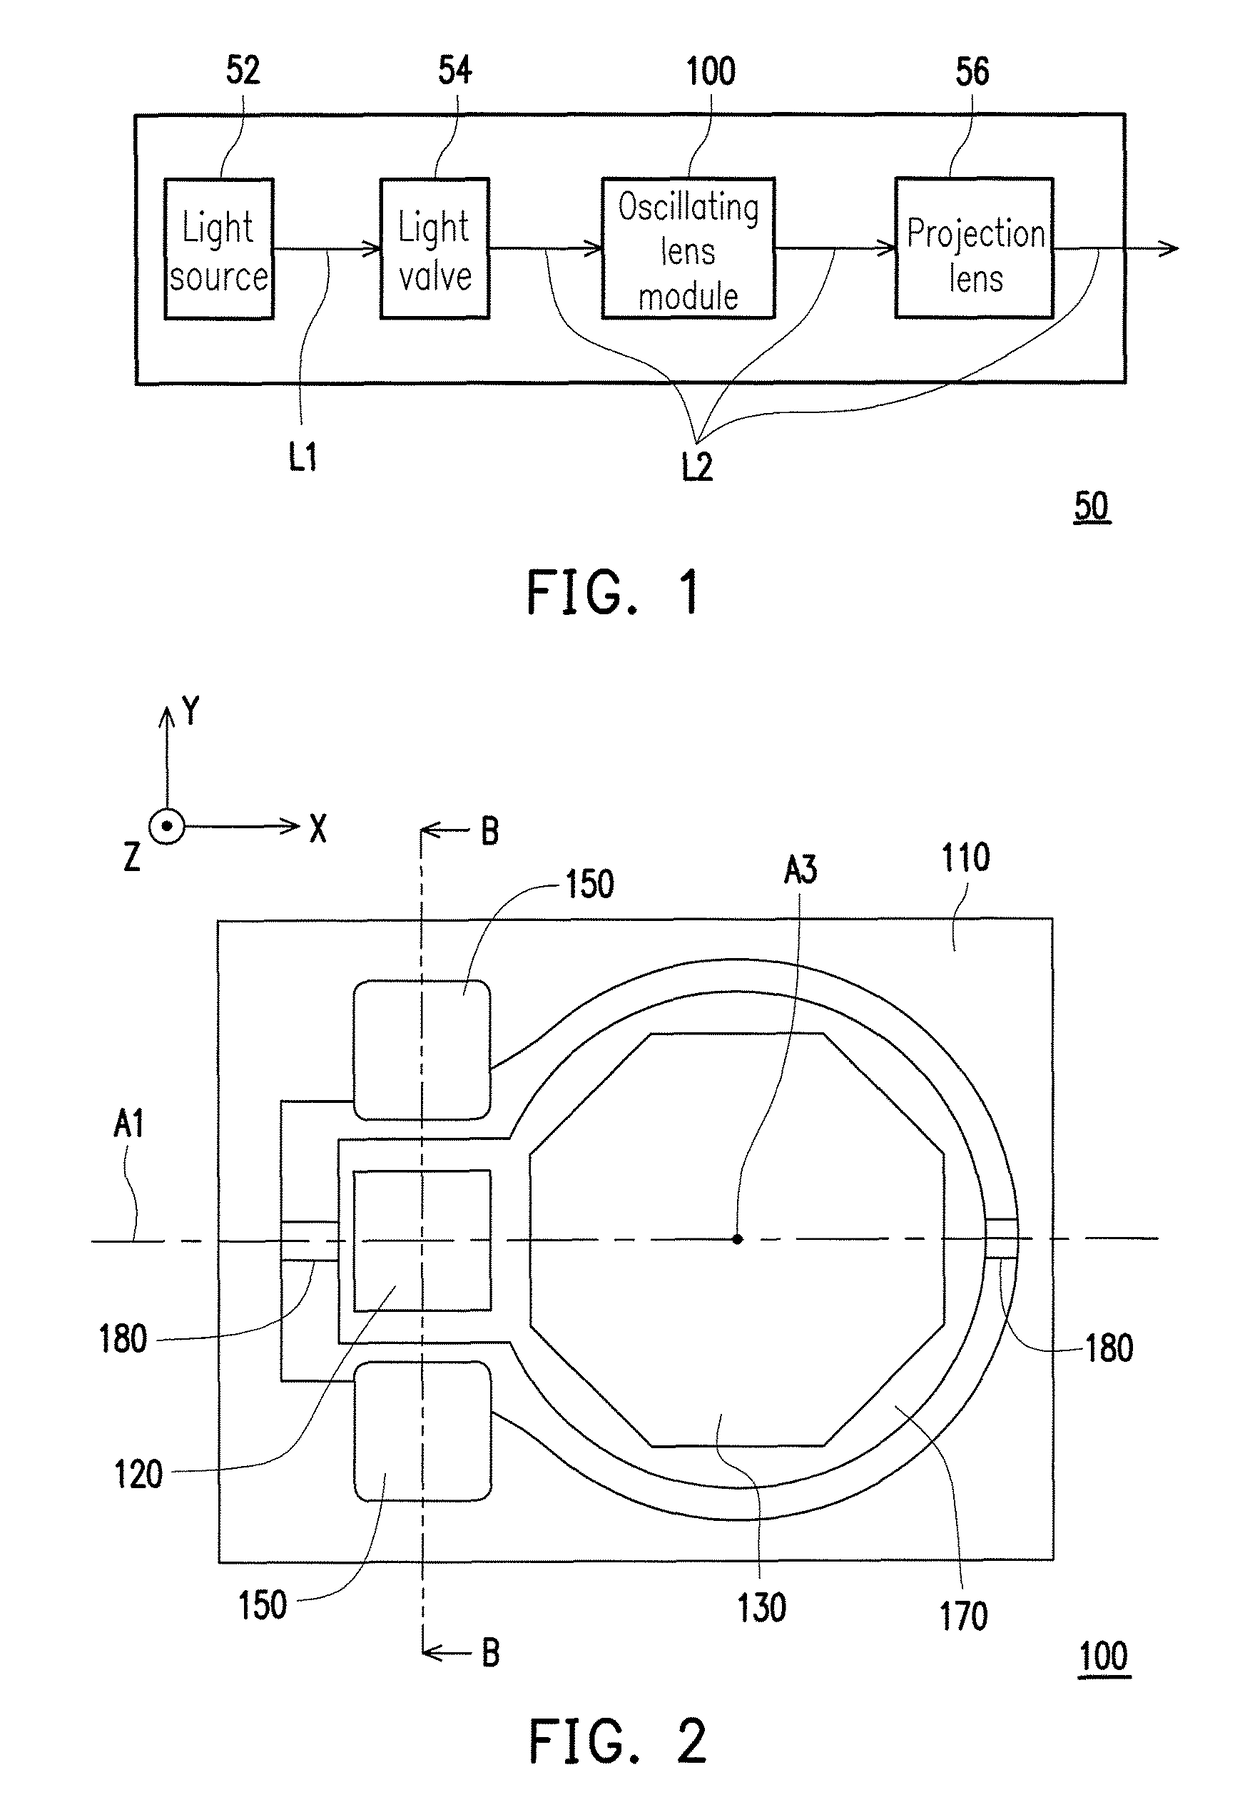 Oscillating lens module and projector